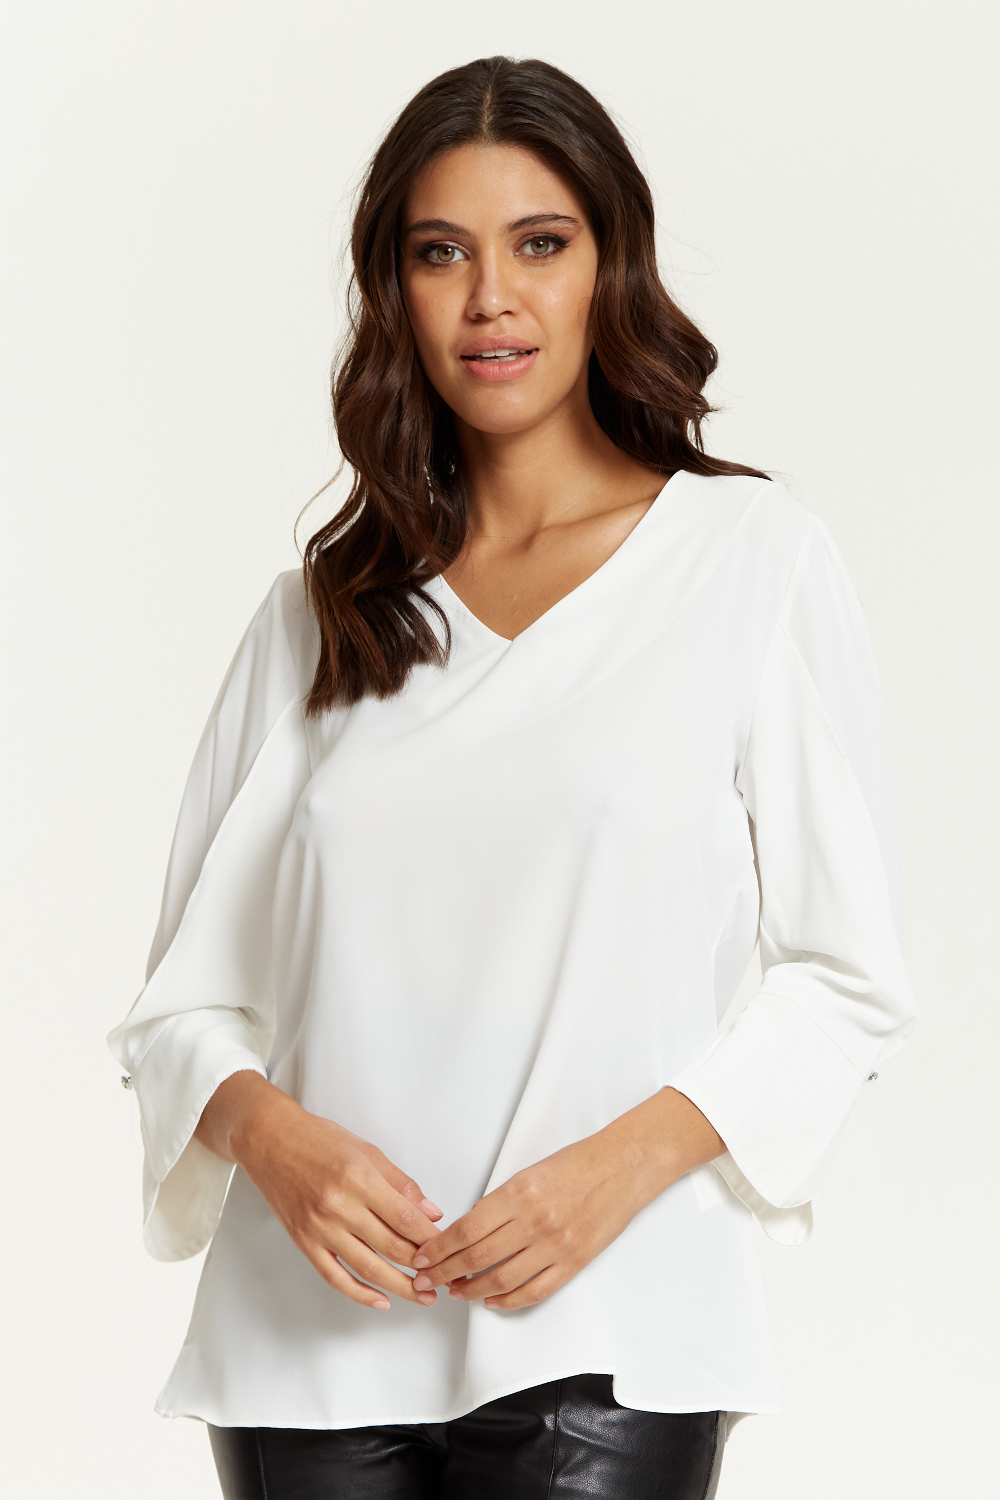 Introducing your new fave top from our latest collection. Chic, versatile, and the perfect addition to your new-season wardrobe, this style is everything you've been scrolling for. Pair with your fave jeans and chunky trainers for off-duty days or go all-out with wide leg trousers and statement heels. Want more?